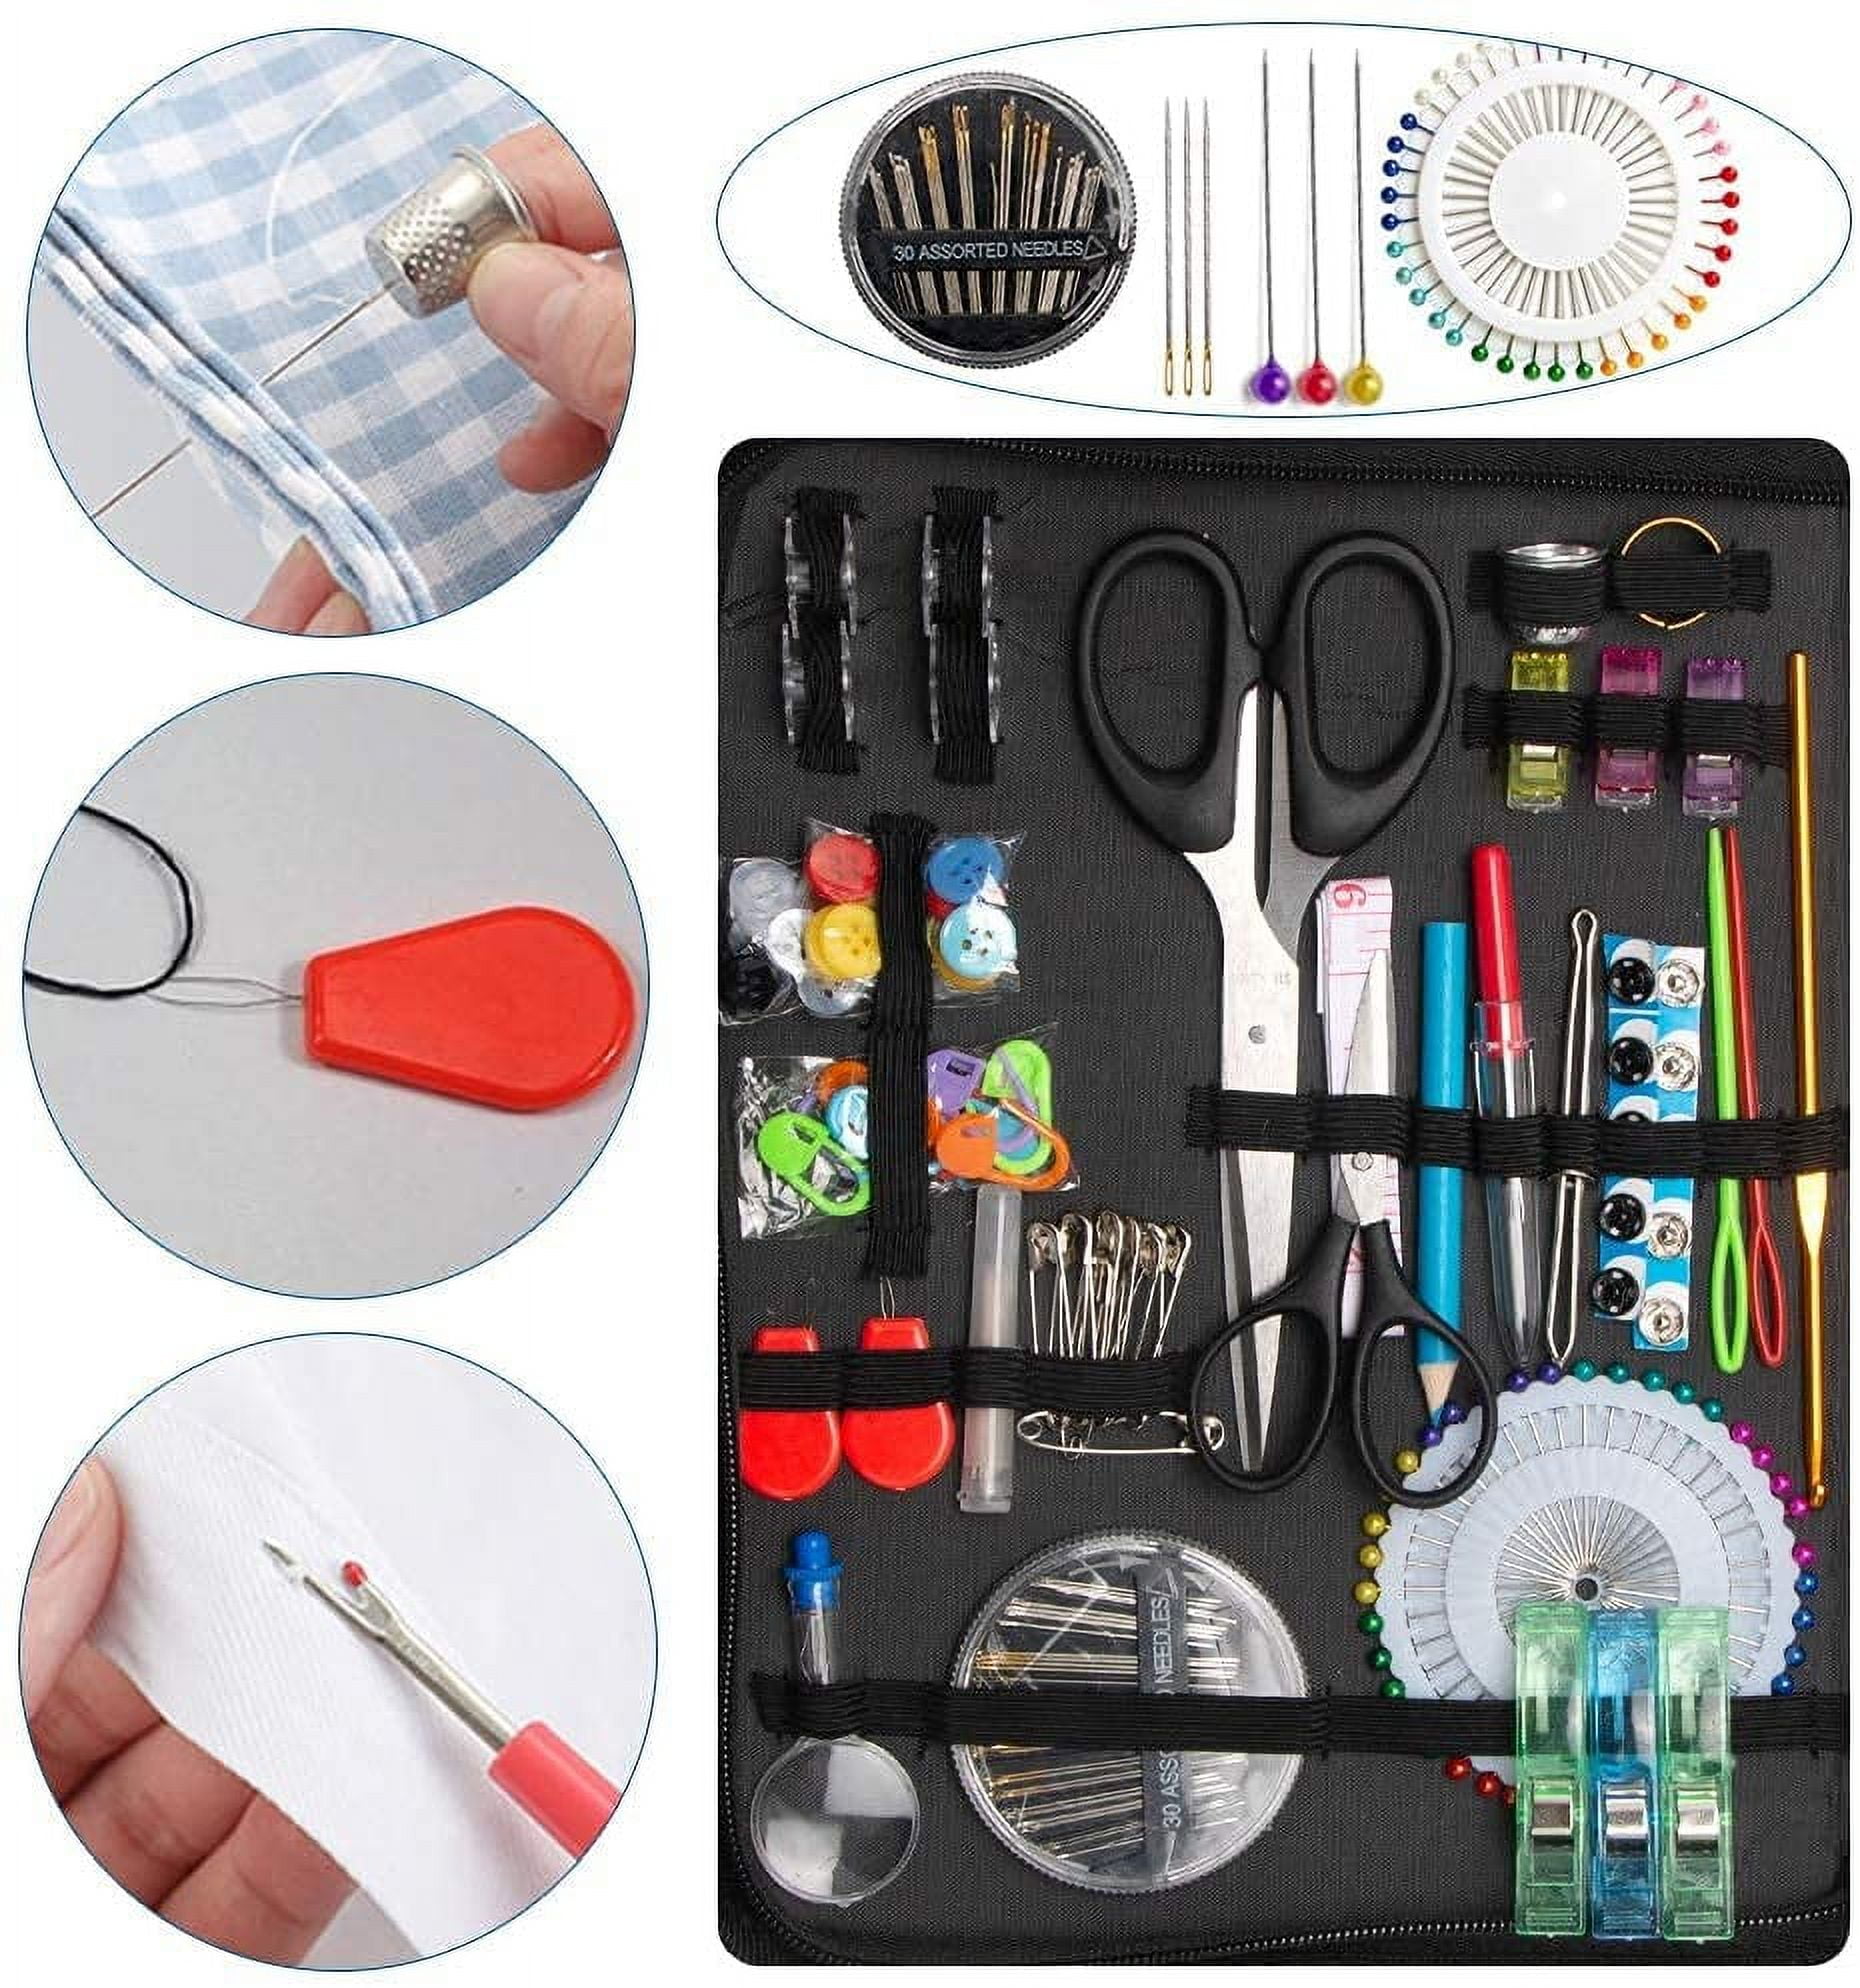 Marcoon Sewing Kit, Zipper Portable Mini Sewing Kits for Adults